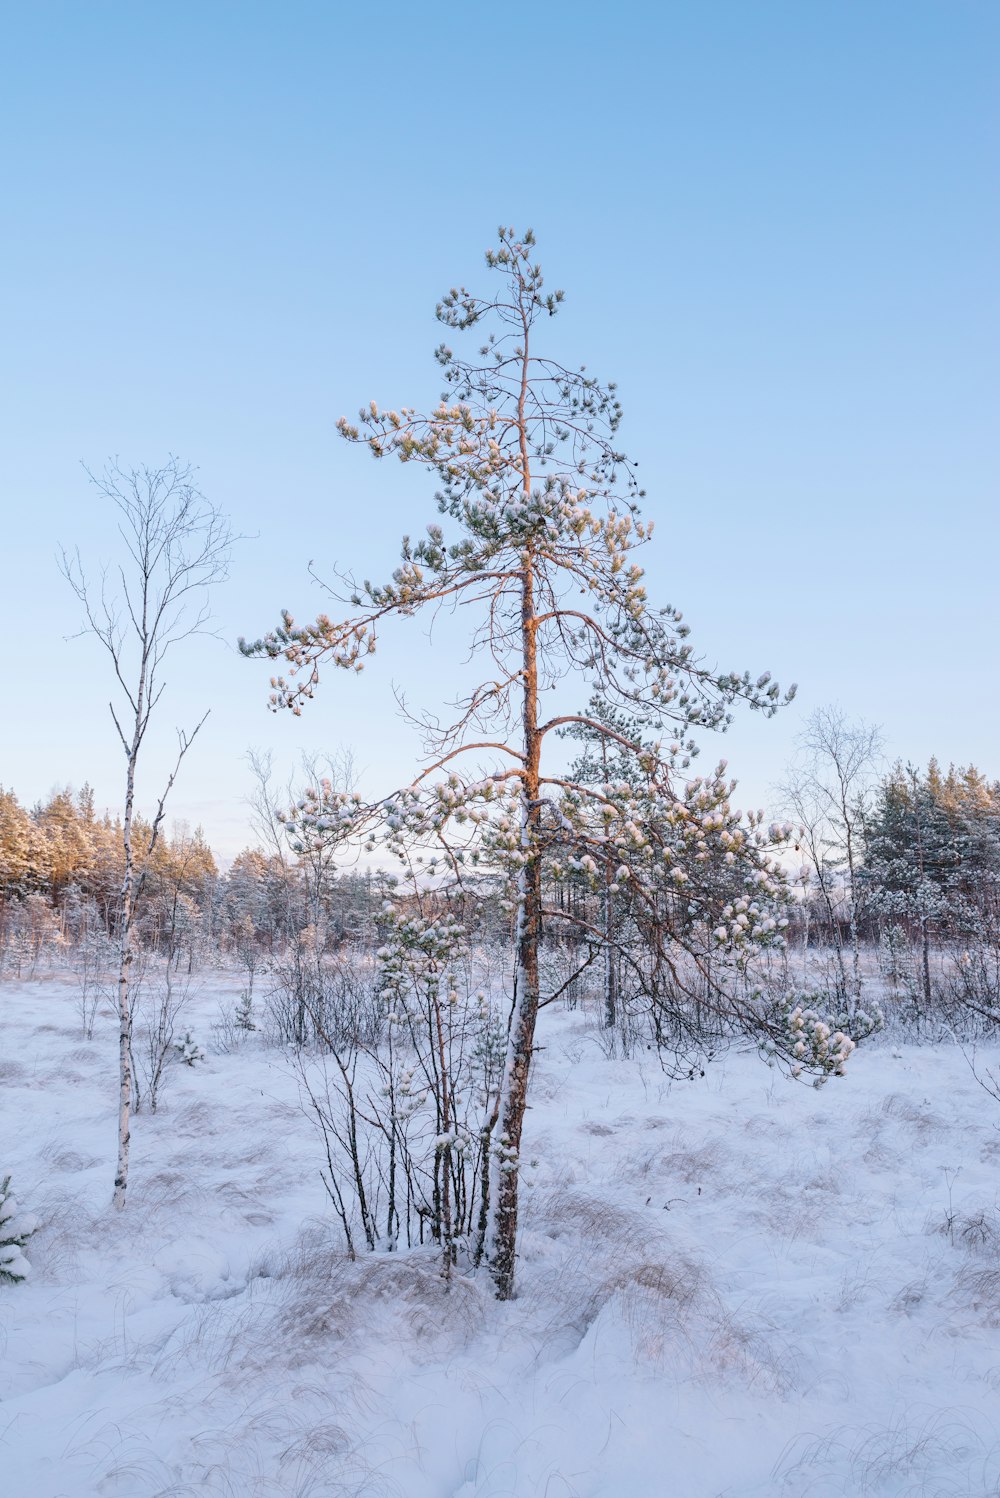 a small pine tree in the middle of a snowy field